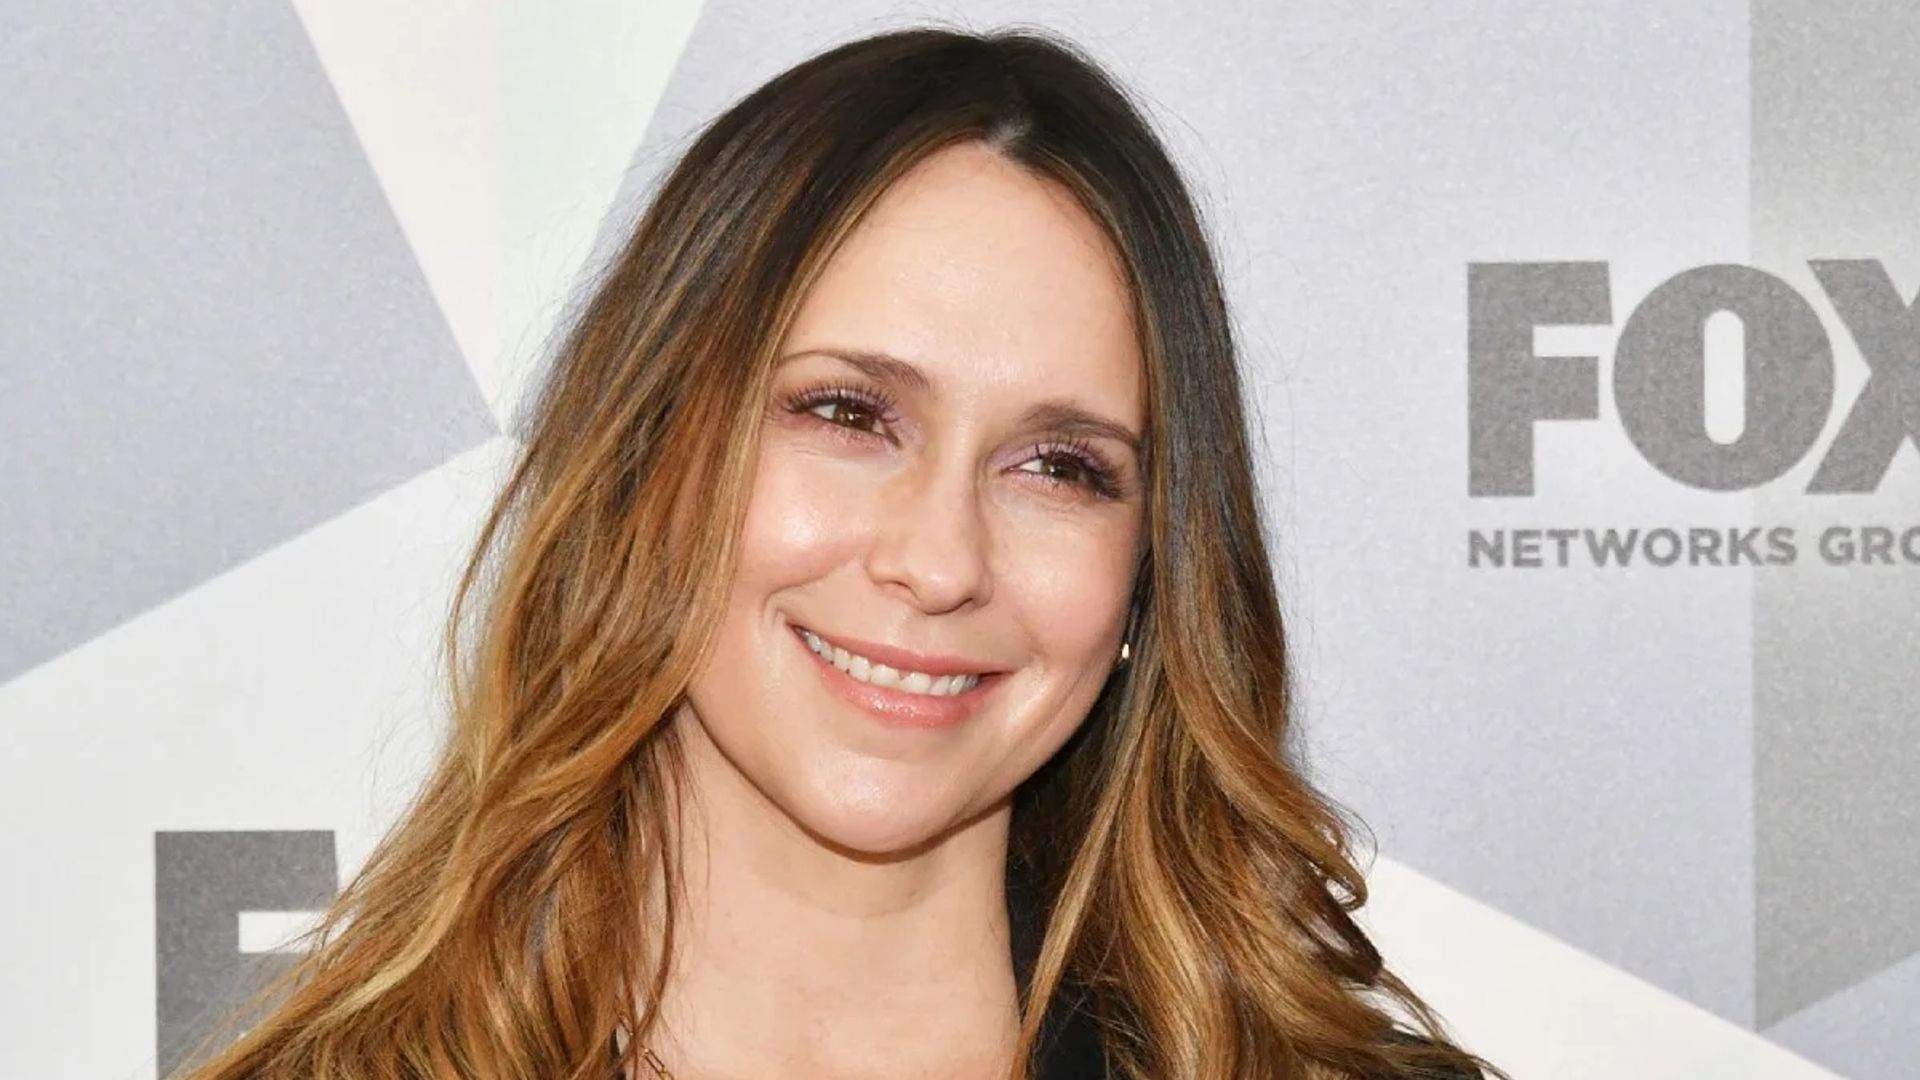 Jennifer Love Hewitt's three kids: everything she's said about parenting